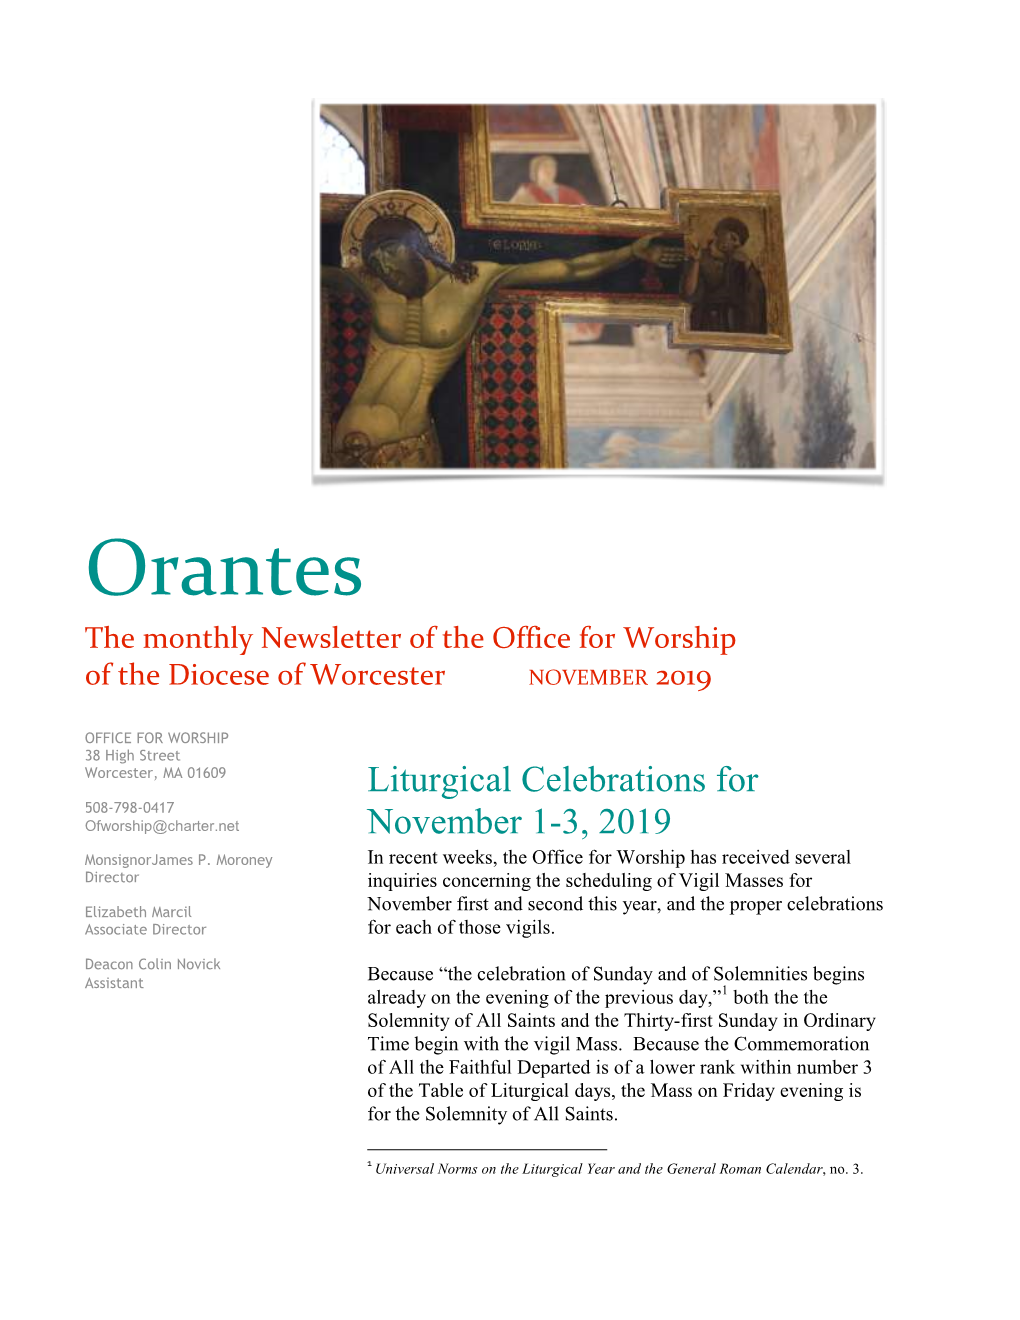 Orantes the Monthly Newsletter of the Office for Worship of the Diocese of Worcester NOVEMBER 2019